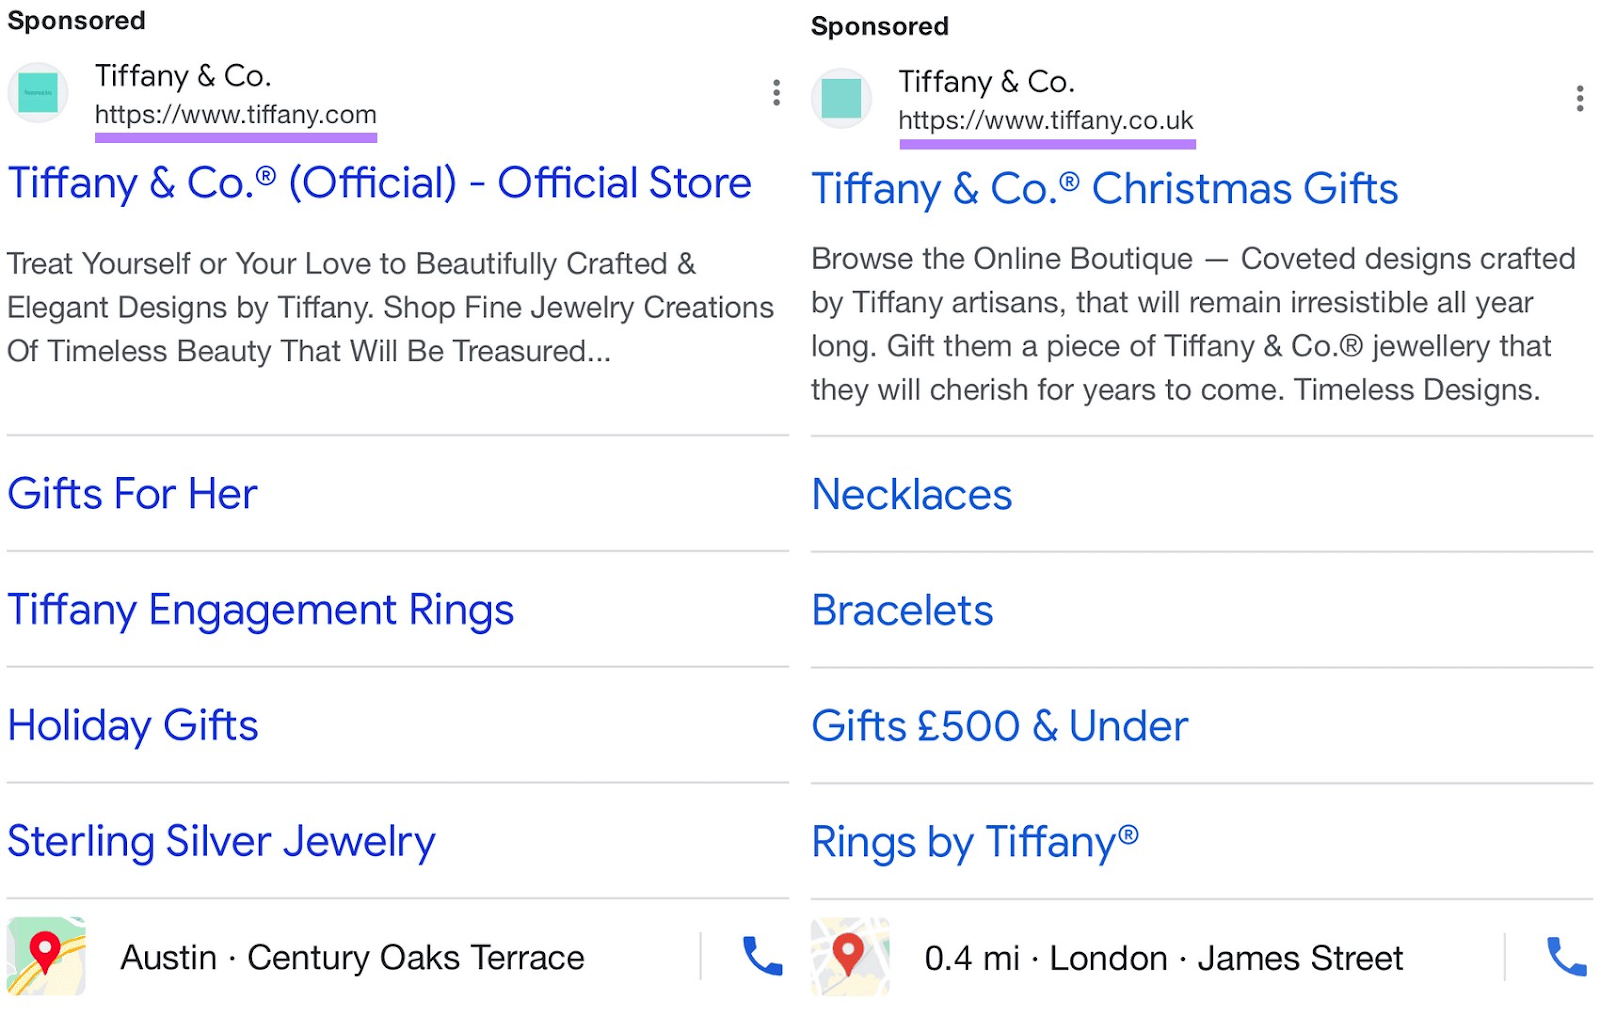 A broadside  by broadside  examination  of Tiffany & Co.'s mobile ad, with "tiffany.com" highlighted successful  the US ad, and "tiffany.co.uk" successful  the UK ad